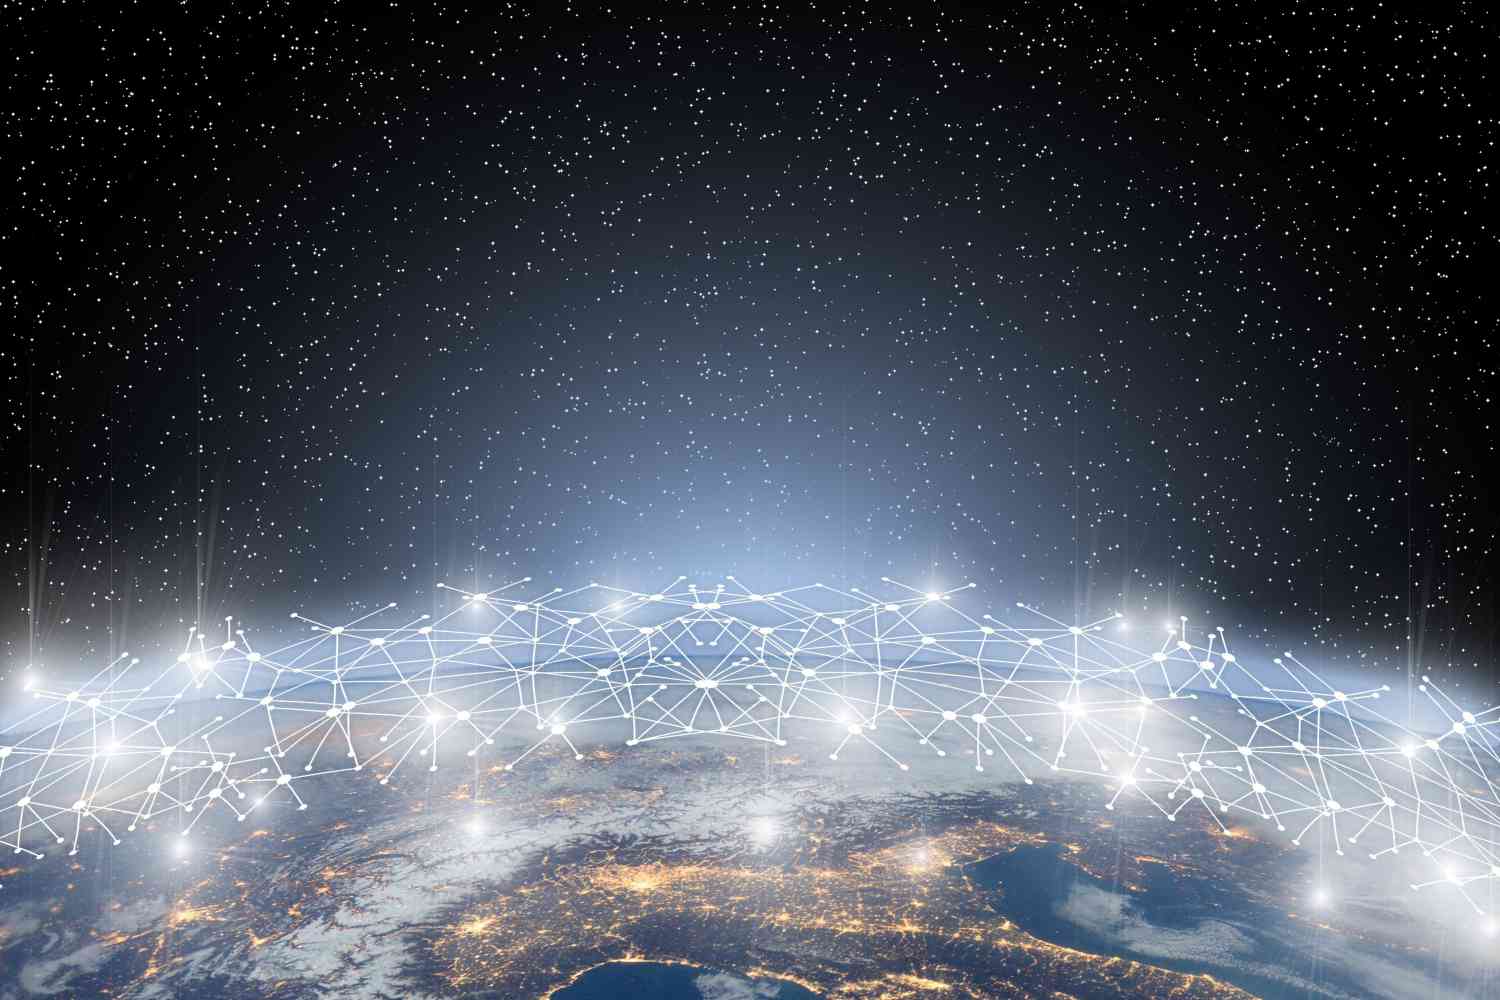 Network as a service (NaaS) across the globe